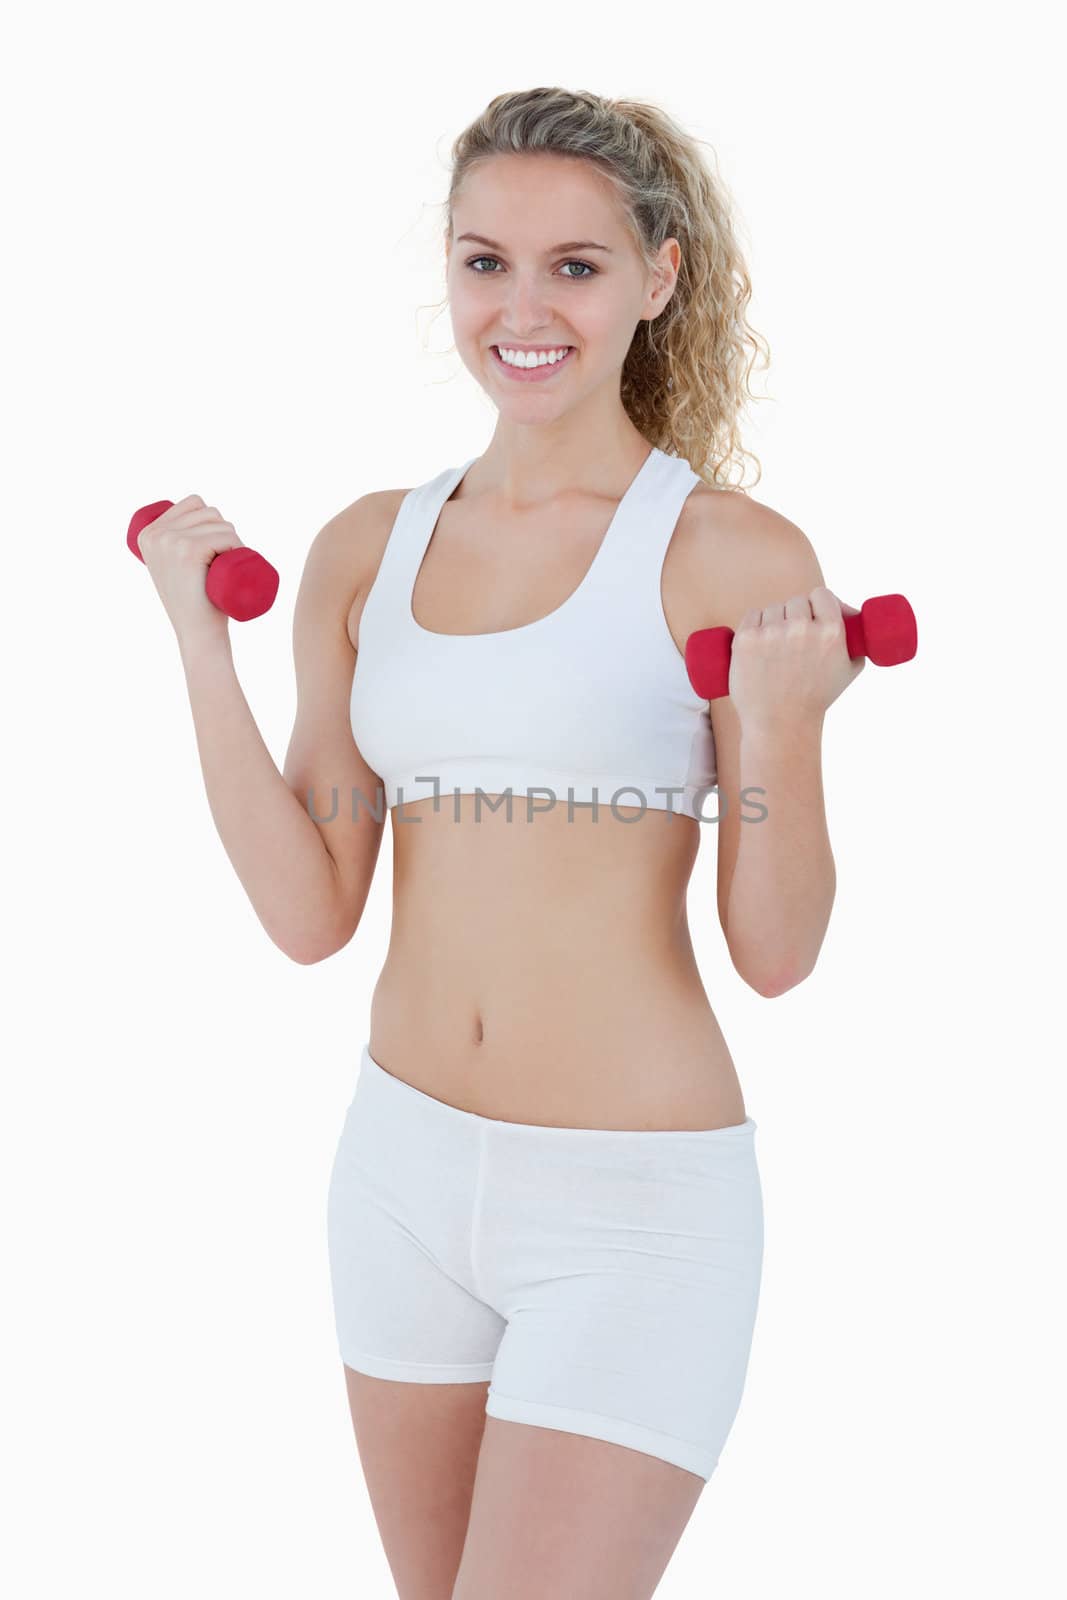 Young attractive woman smiling and lifting red weights against a white background